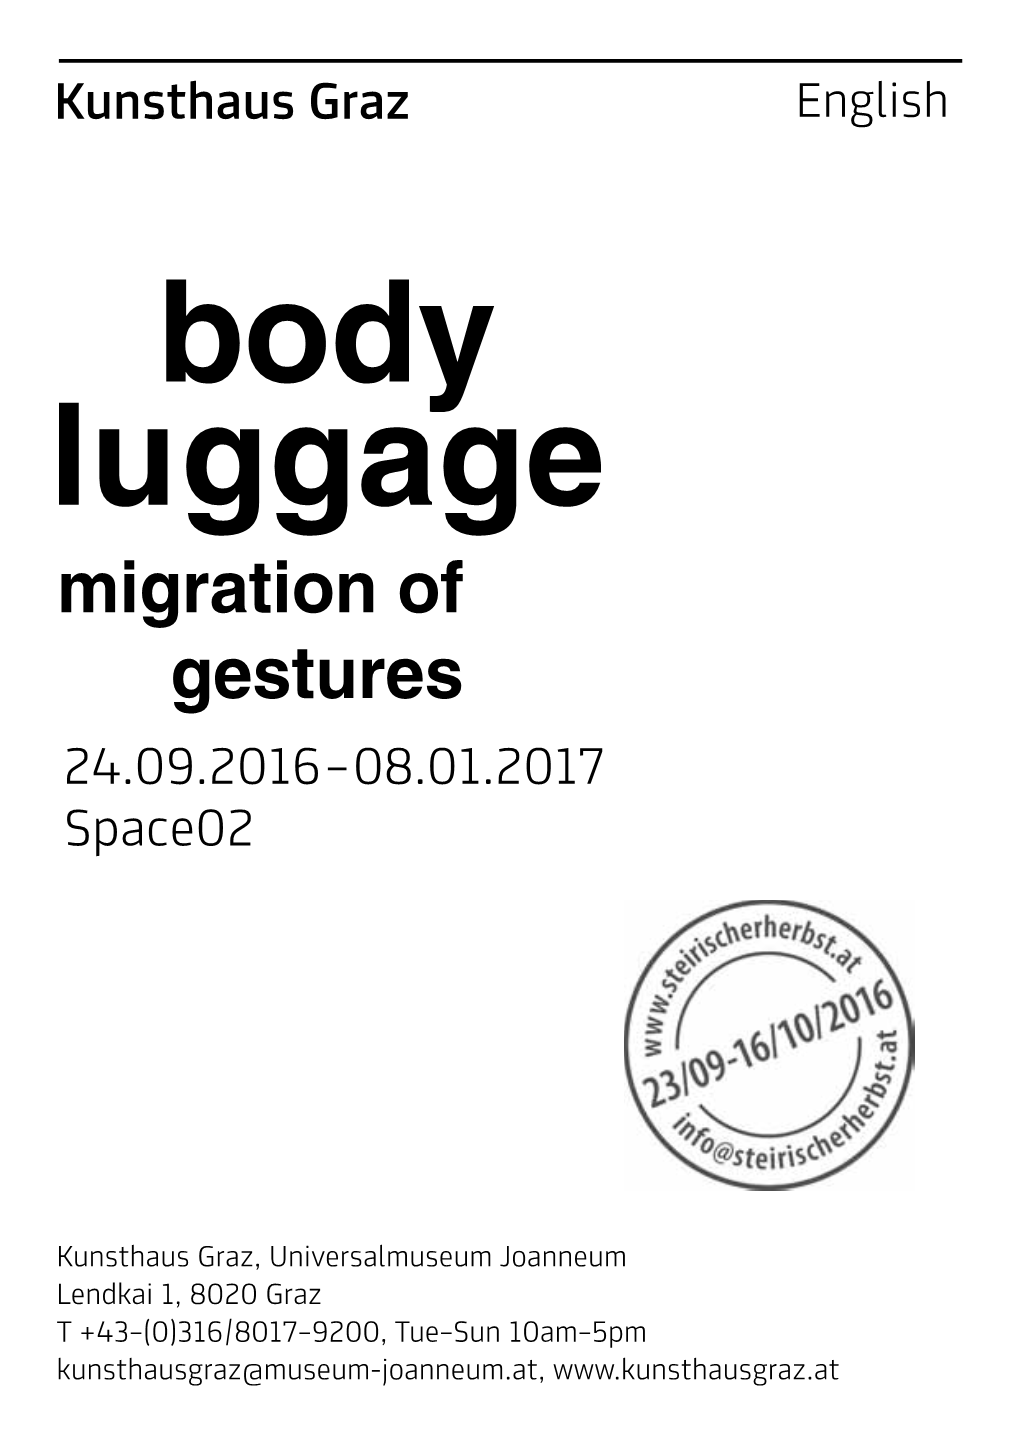 Body Luggage the Shifting of Cultural Cartographies’ Migration of Gestures Is the Theme of Steirischer Herbst 2016